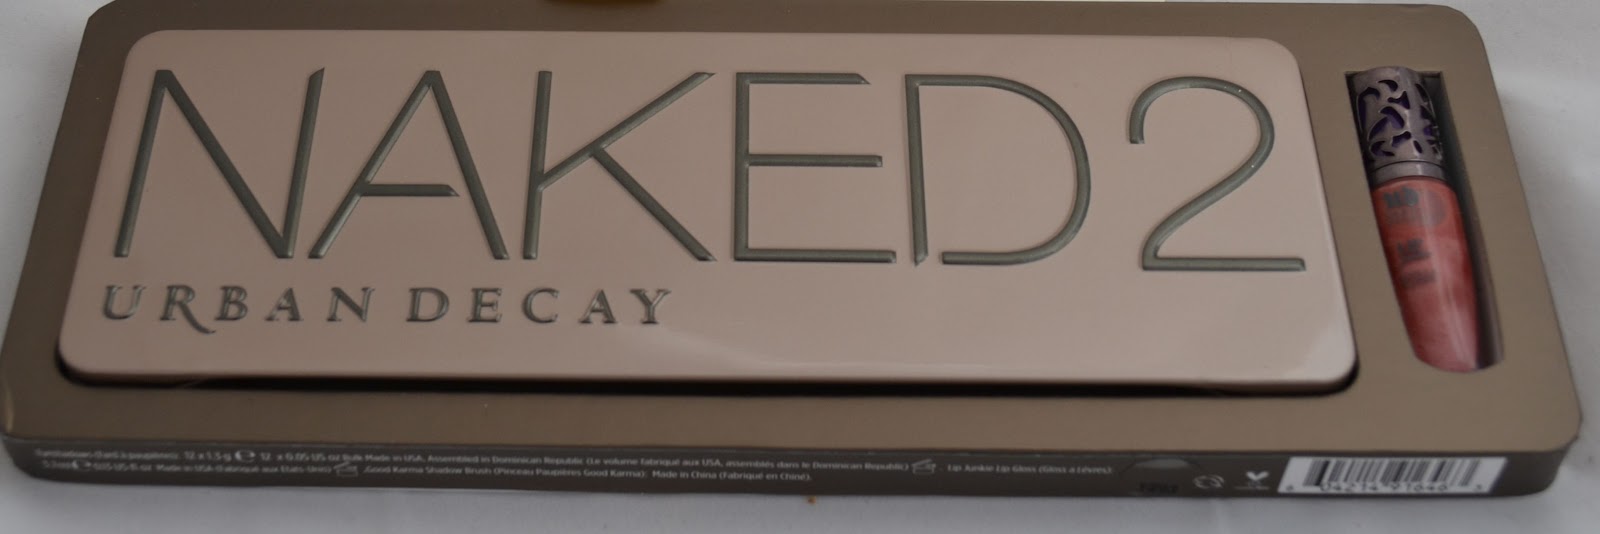 Urban Decay Naked 2 Palette Swatches - Beauty by Miss L